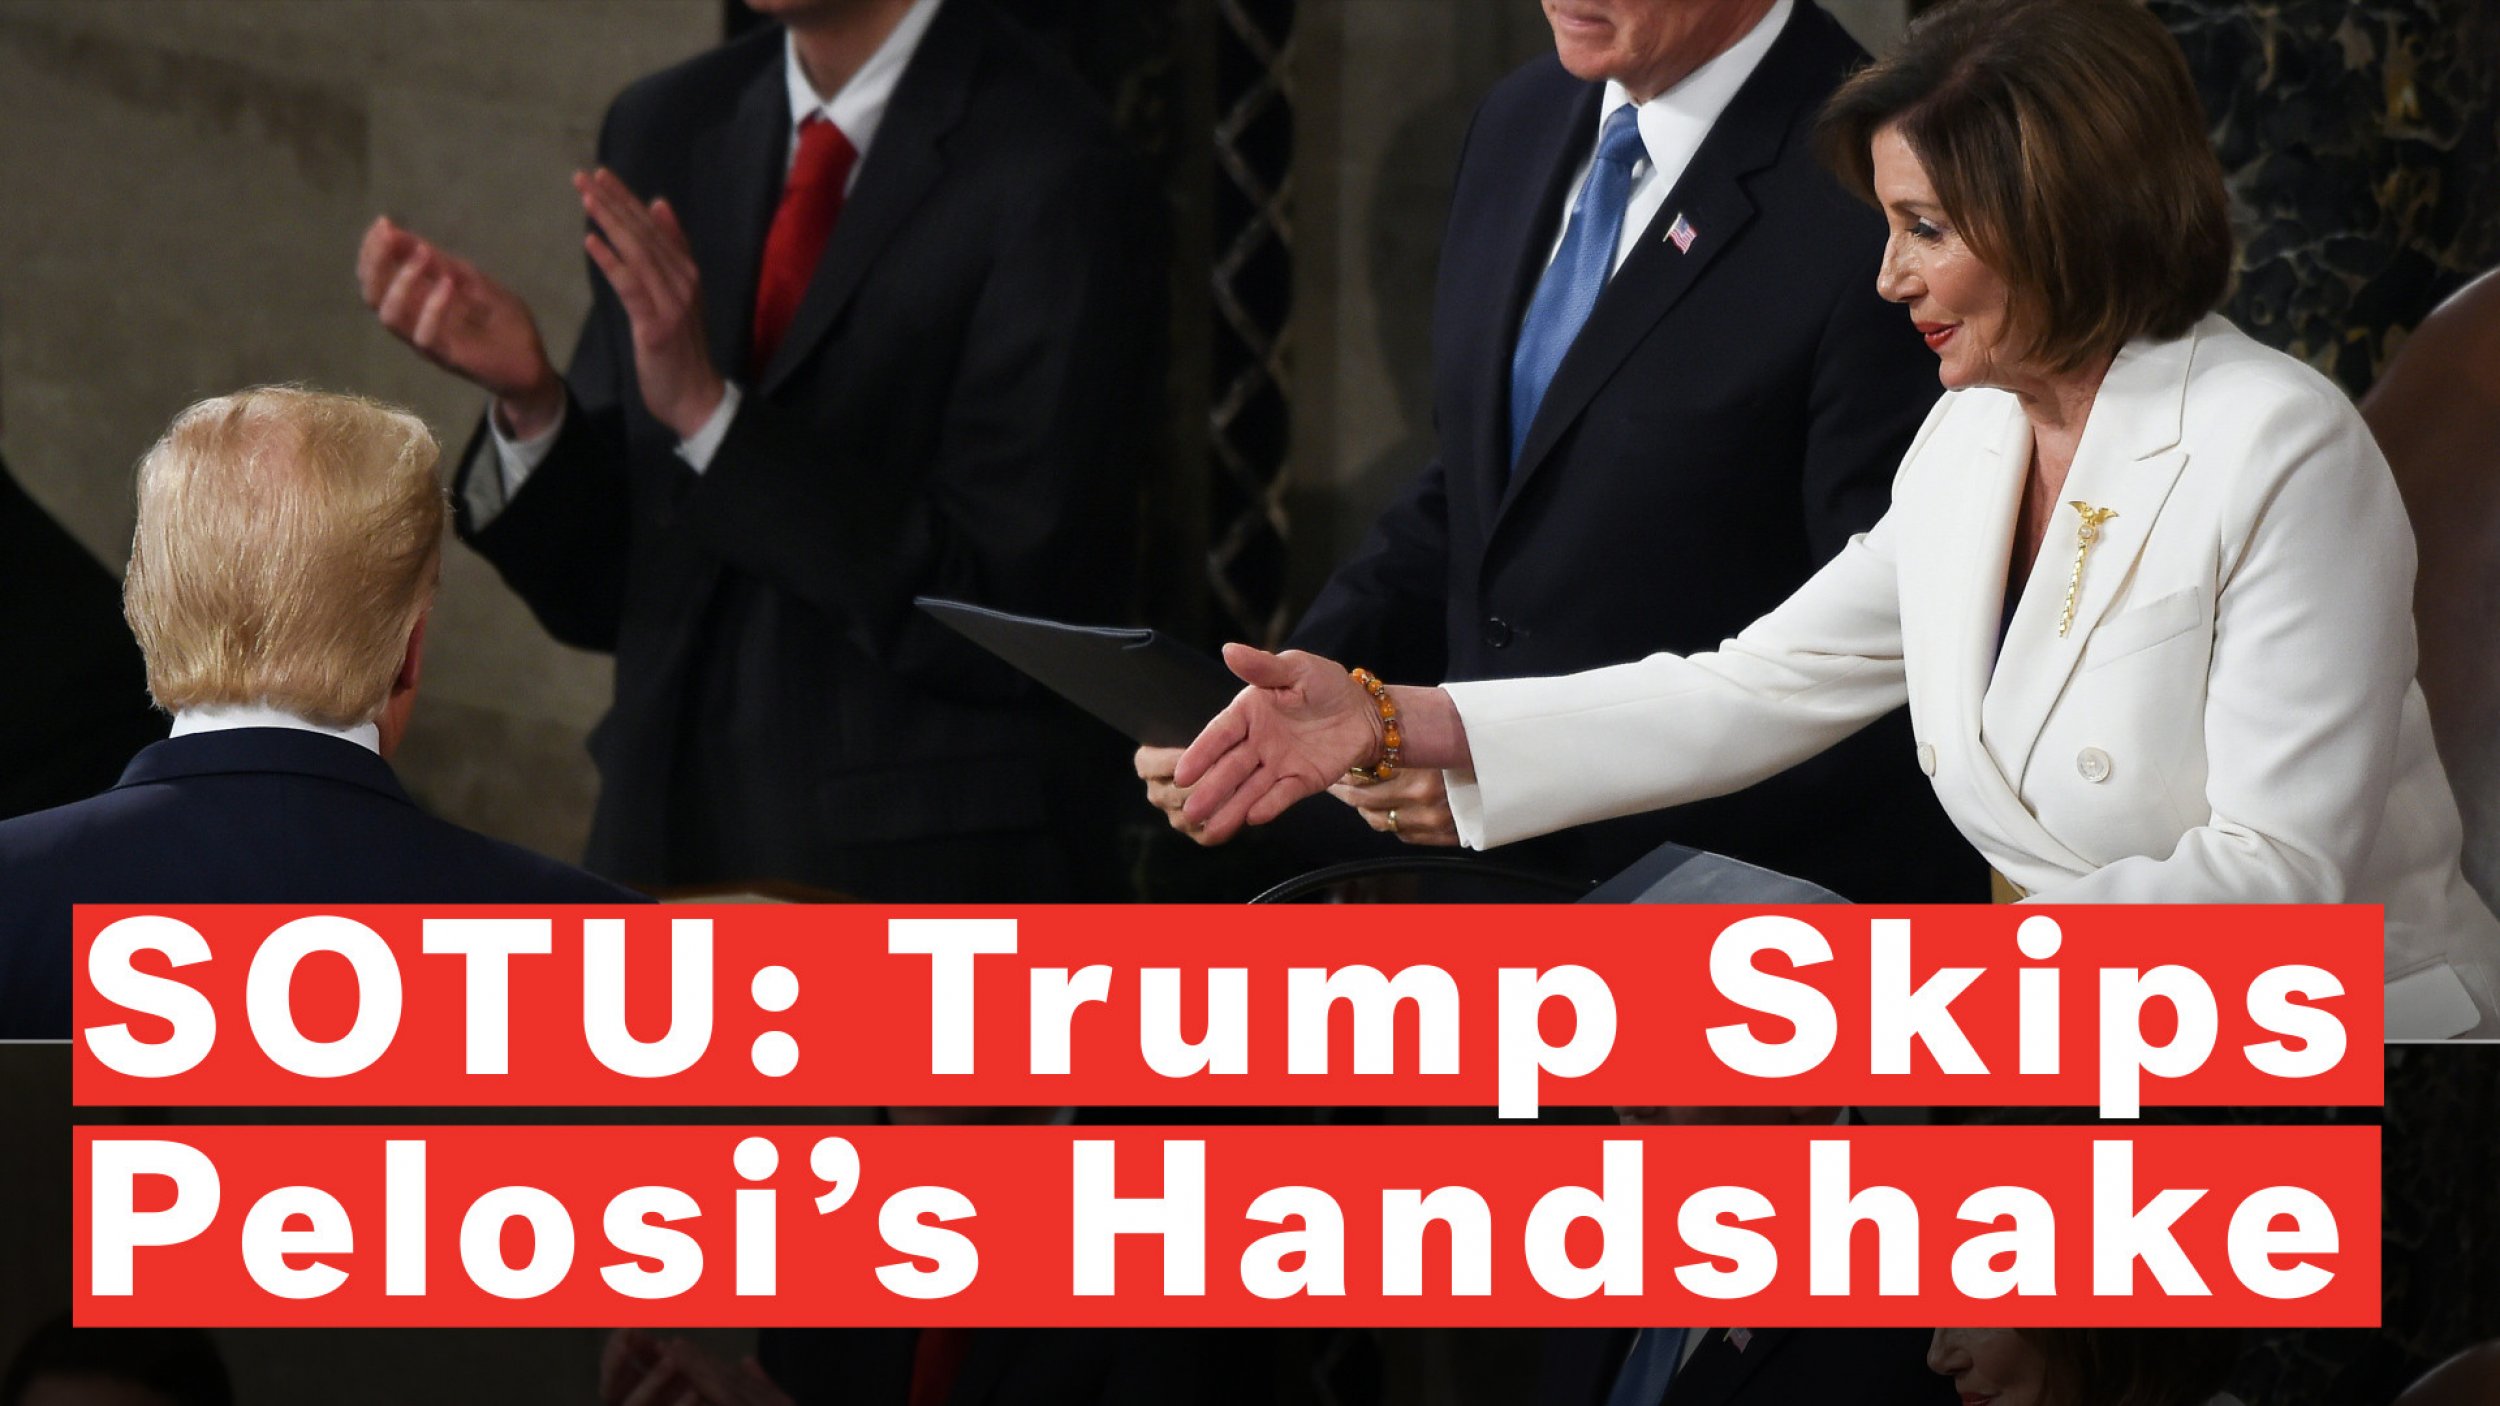 Trump Appears to Snub Pelosis Handshake Moments Before Giving SOTU Address